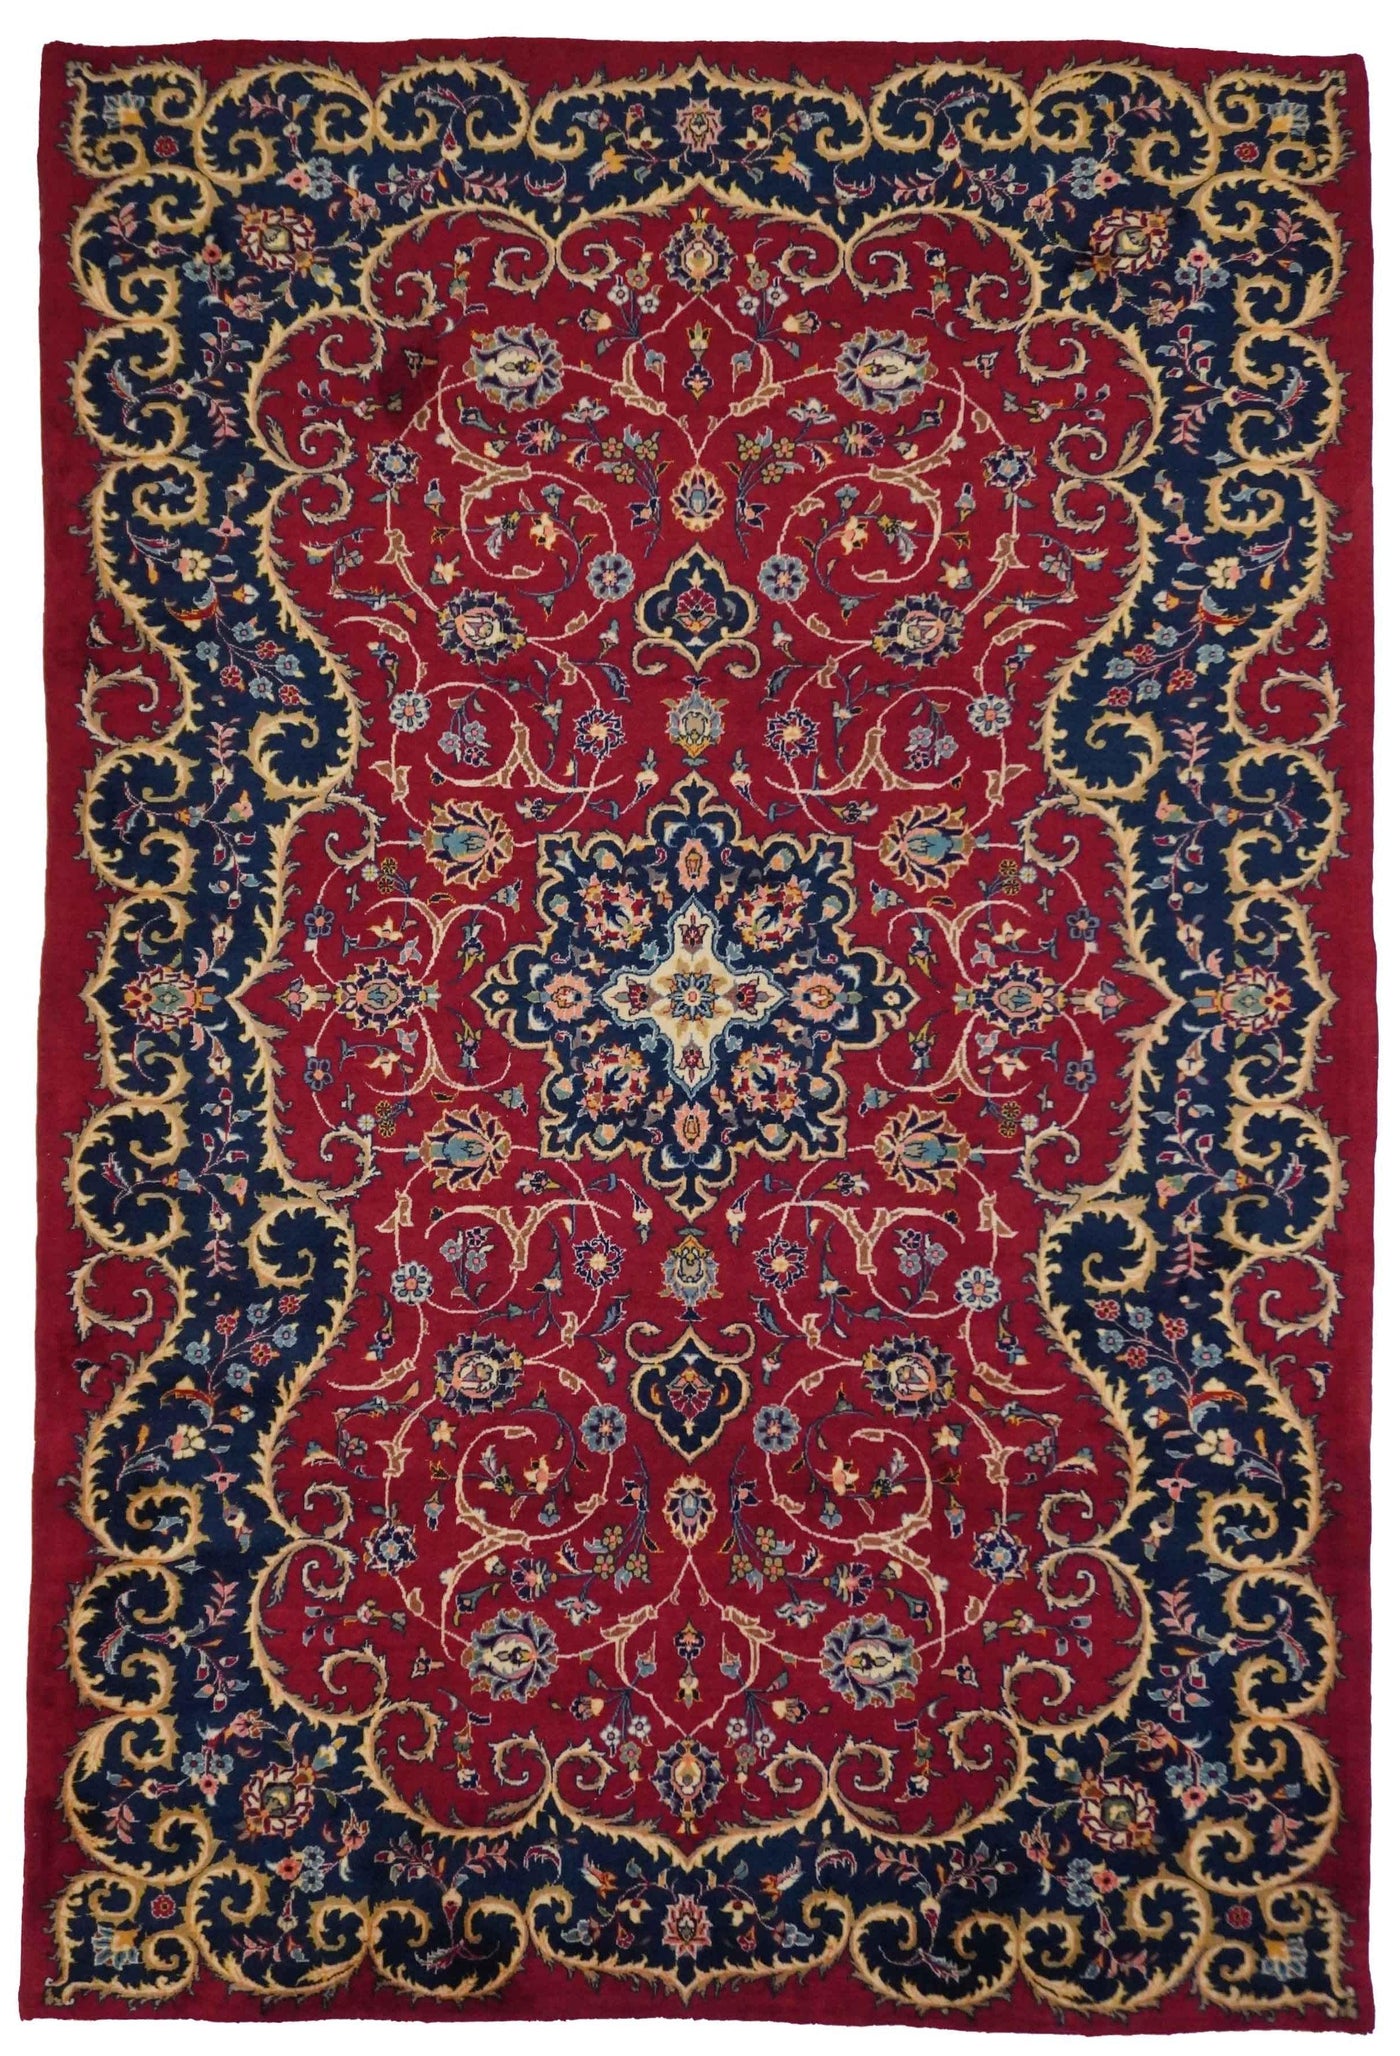 Canvello Persian Kashan Red Rugs For Bedroom - 6'7'' X 9'8''